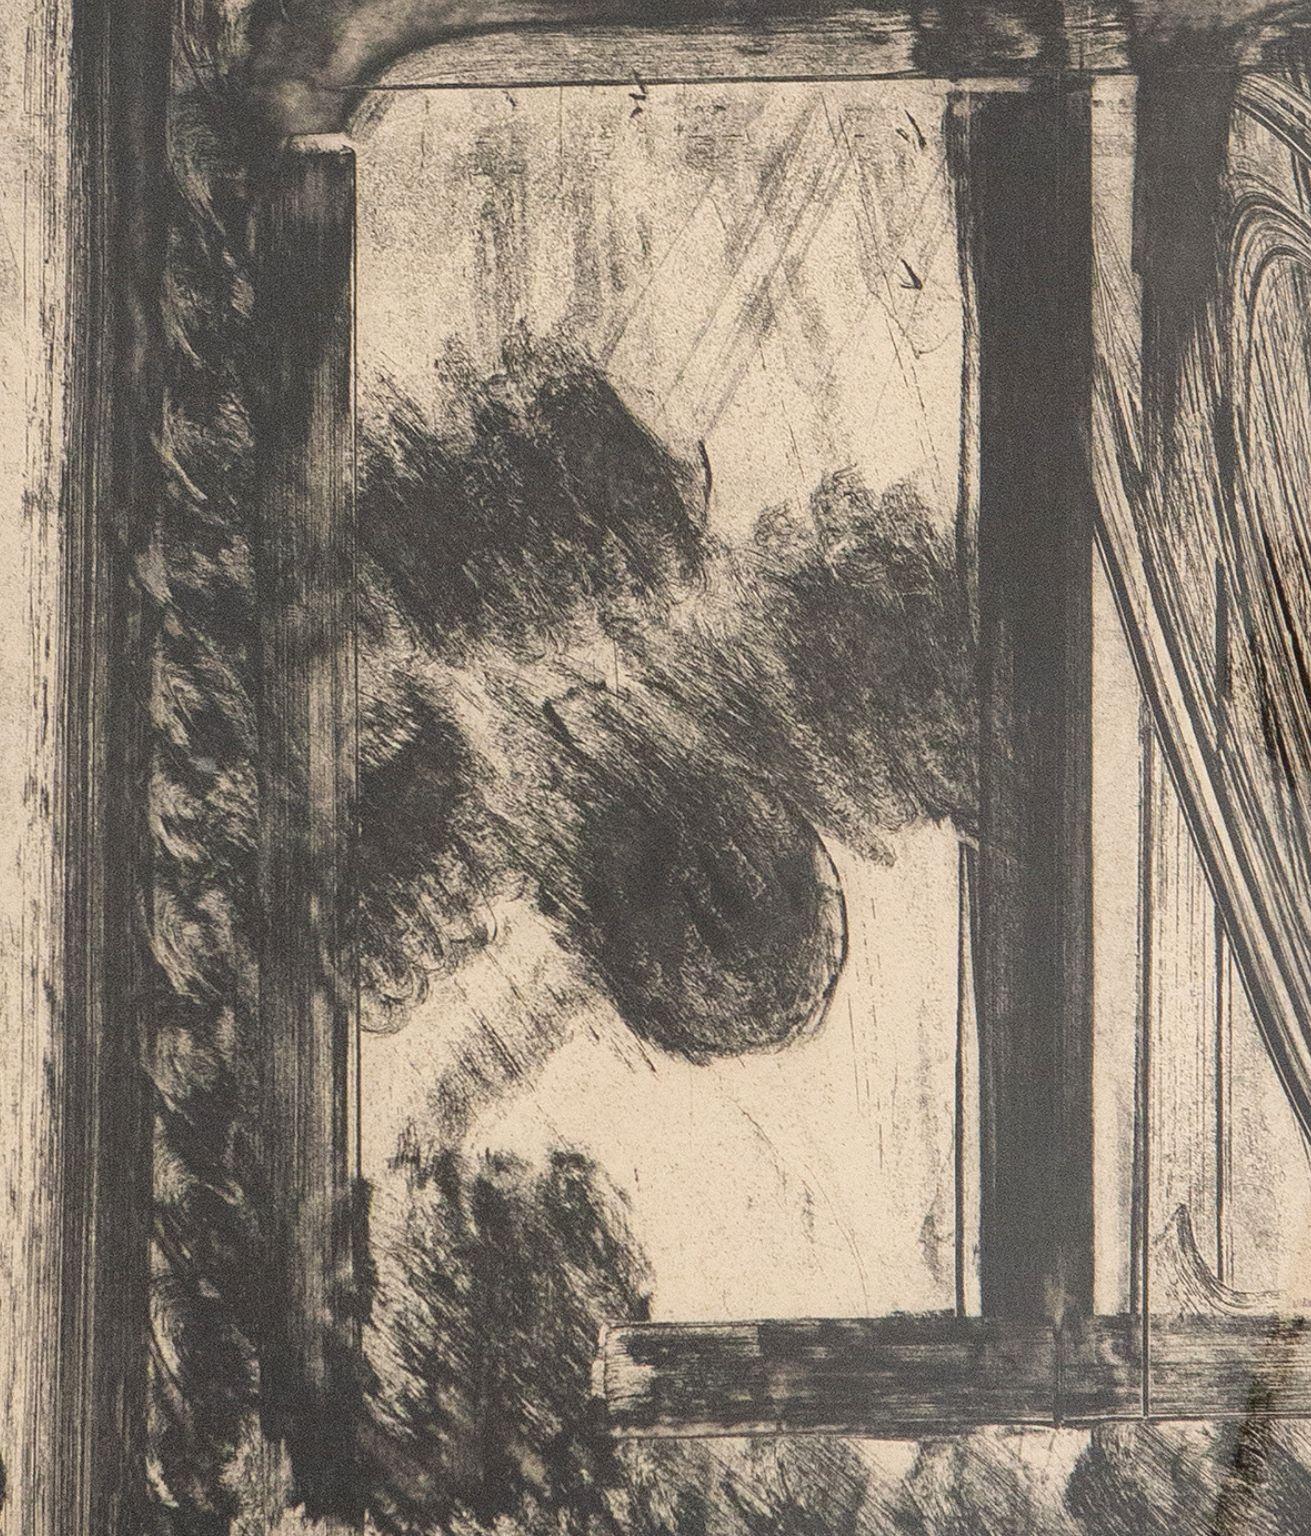 Late Afternoon in the Museum of Art, Etching, 1979 - Abstract Expressionist Print by Howard Hodgkin